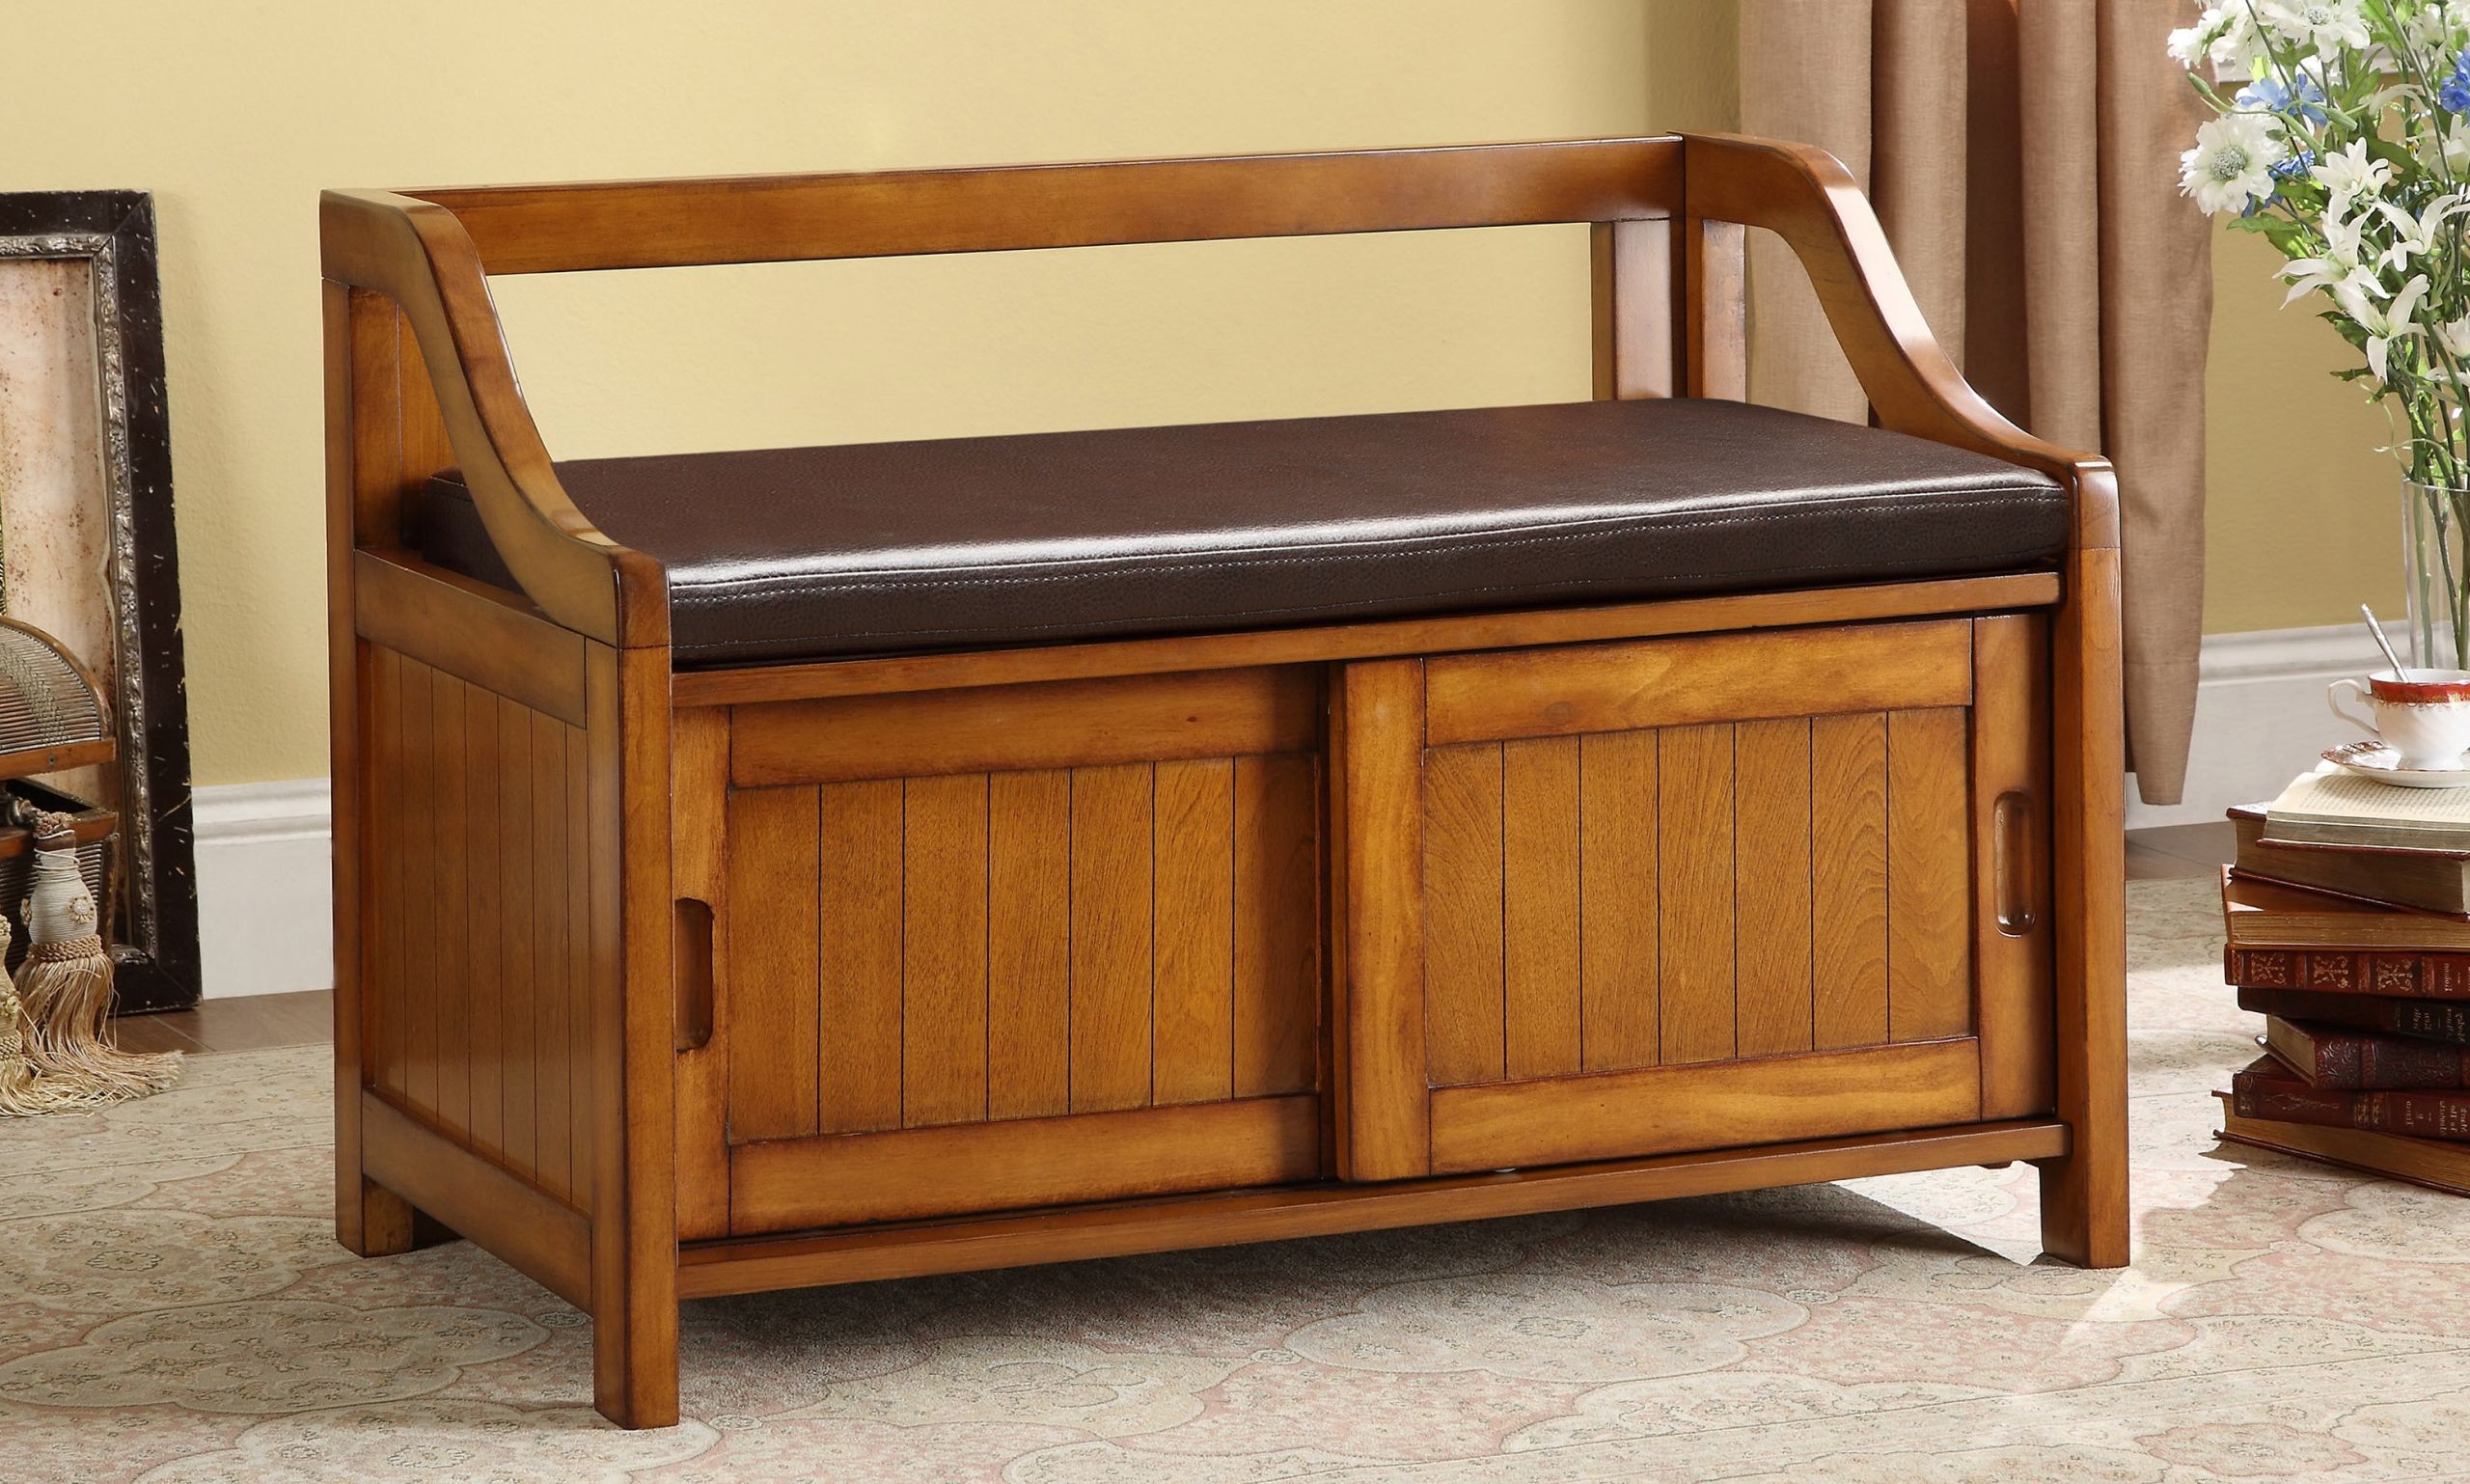 Wood Storage Bench Seat
 Wooden Storage Bench For Shoes